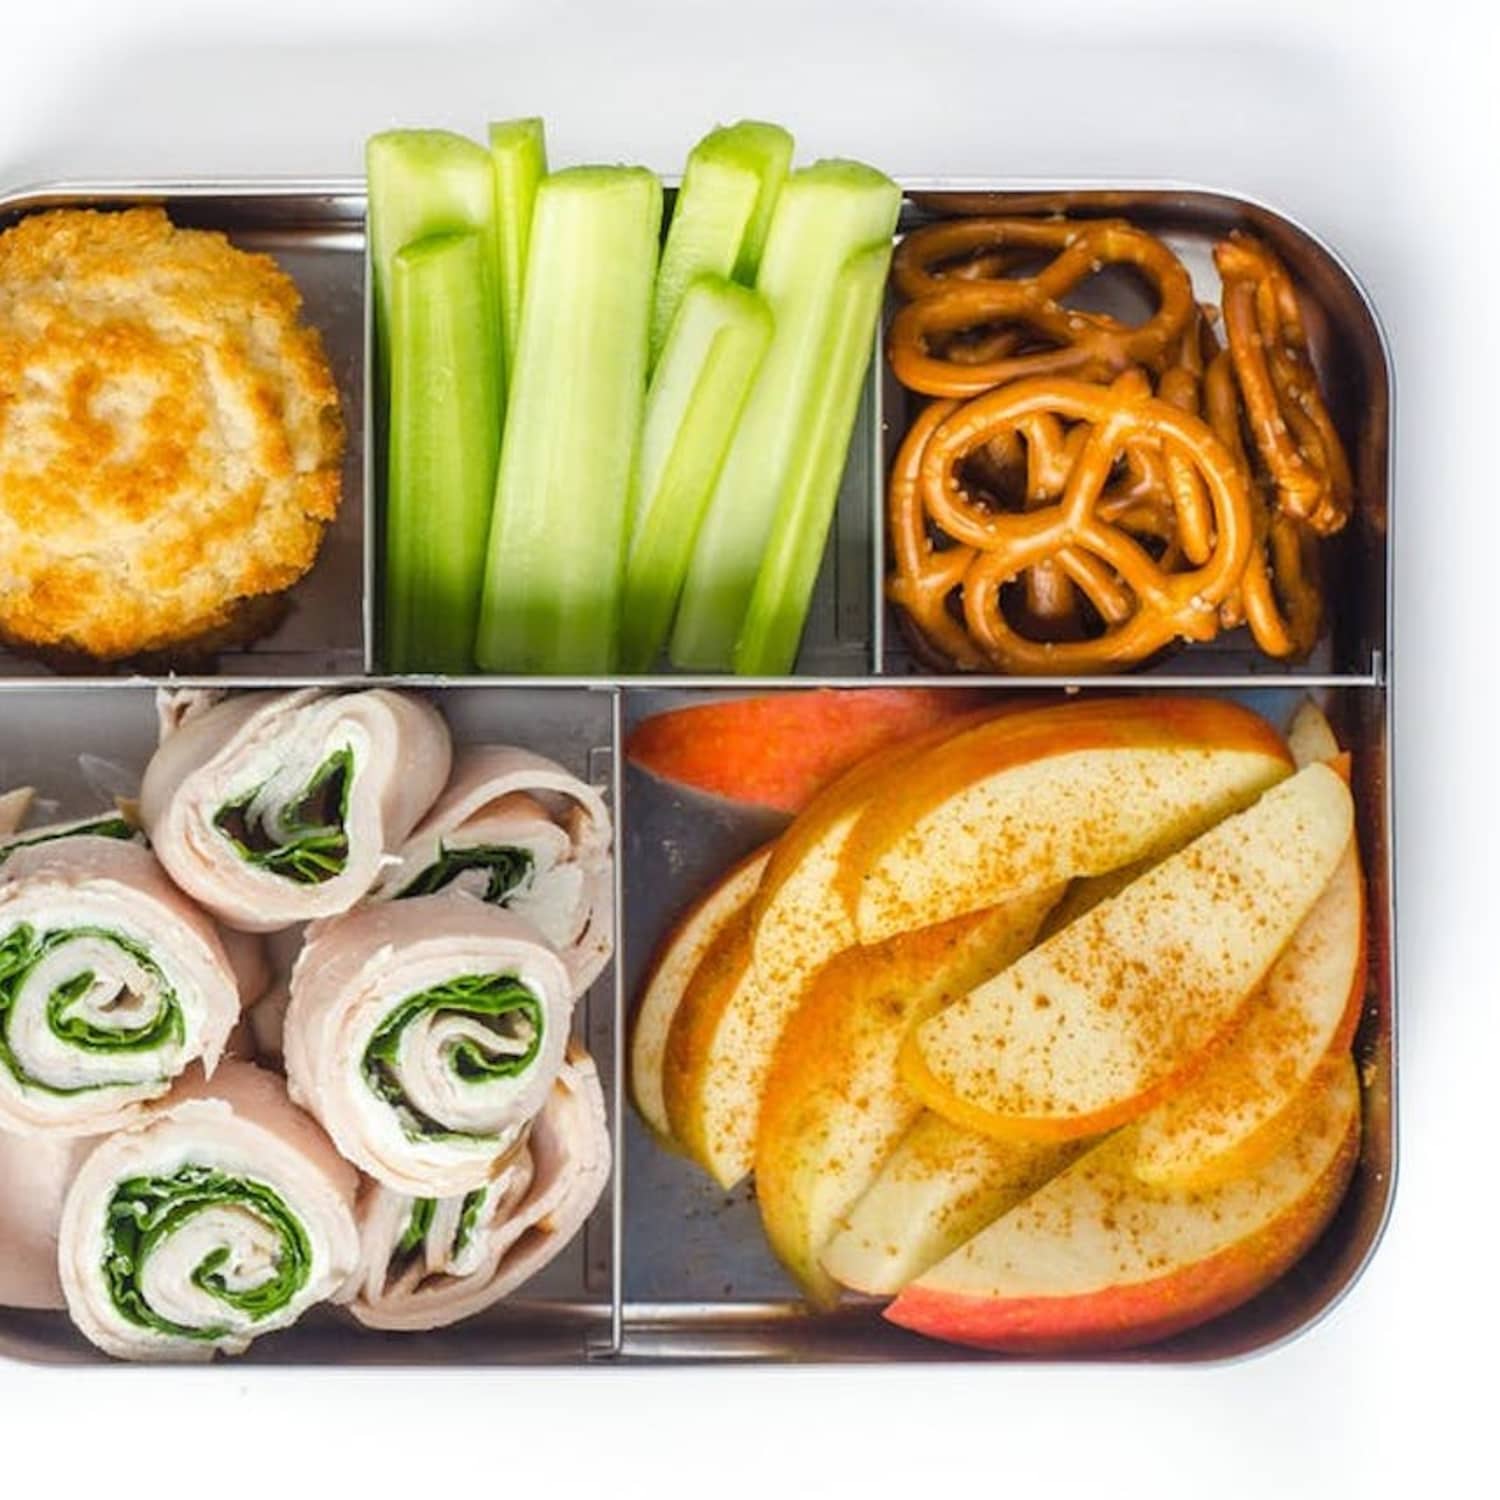 Bento box review: The all-stainless steel LunchBots Quad